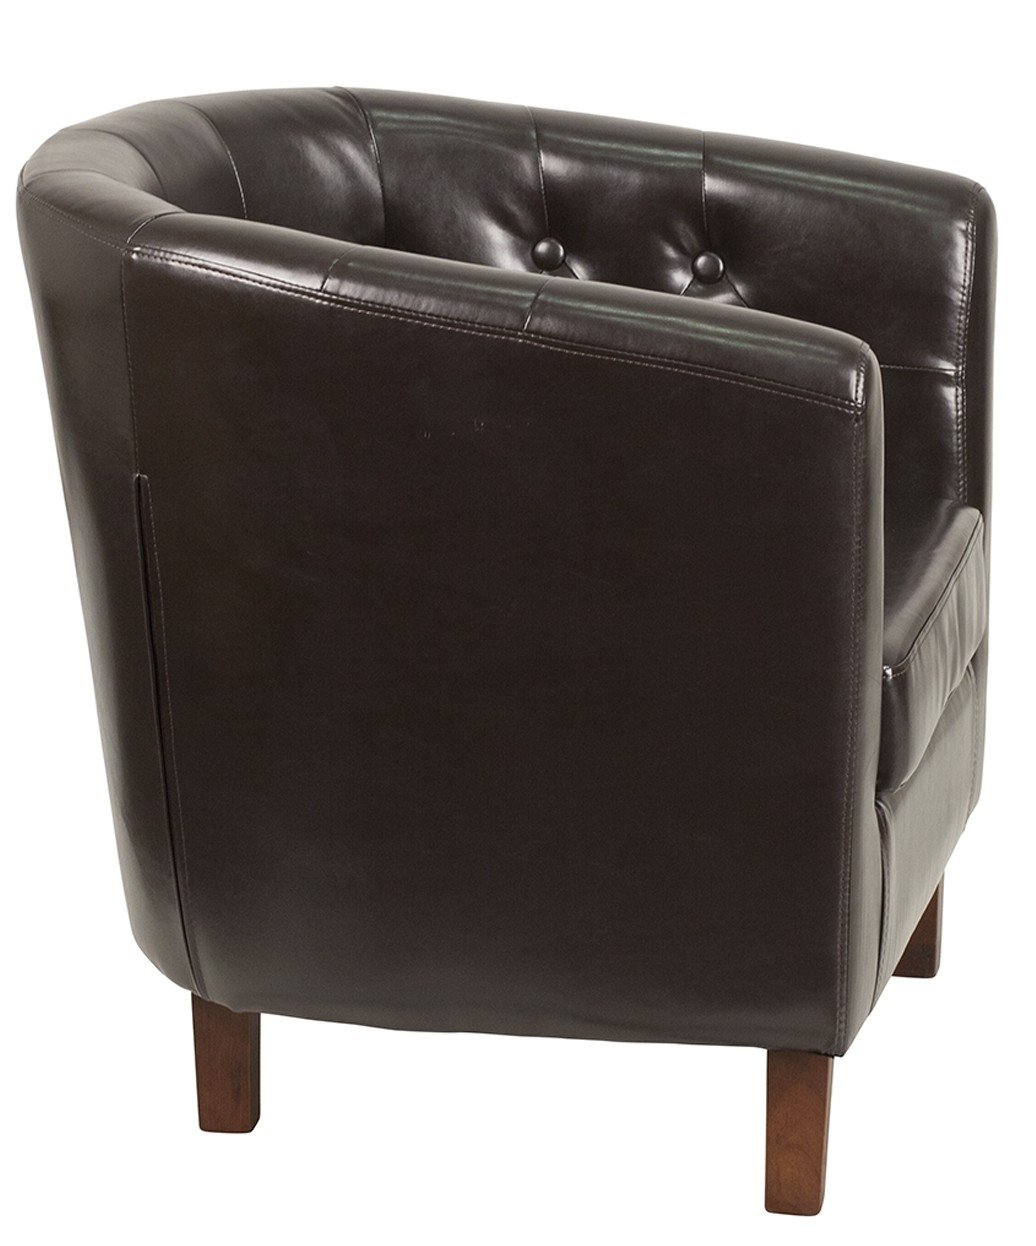 Kensignton Tufted Leather Reception Chair